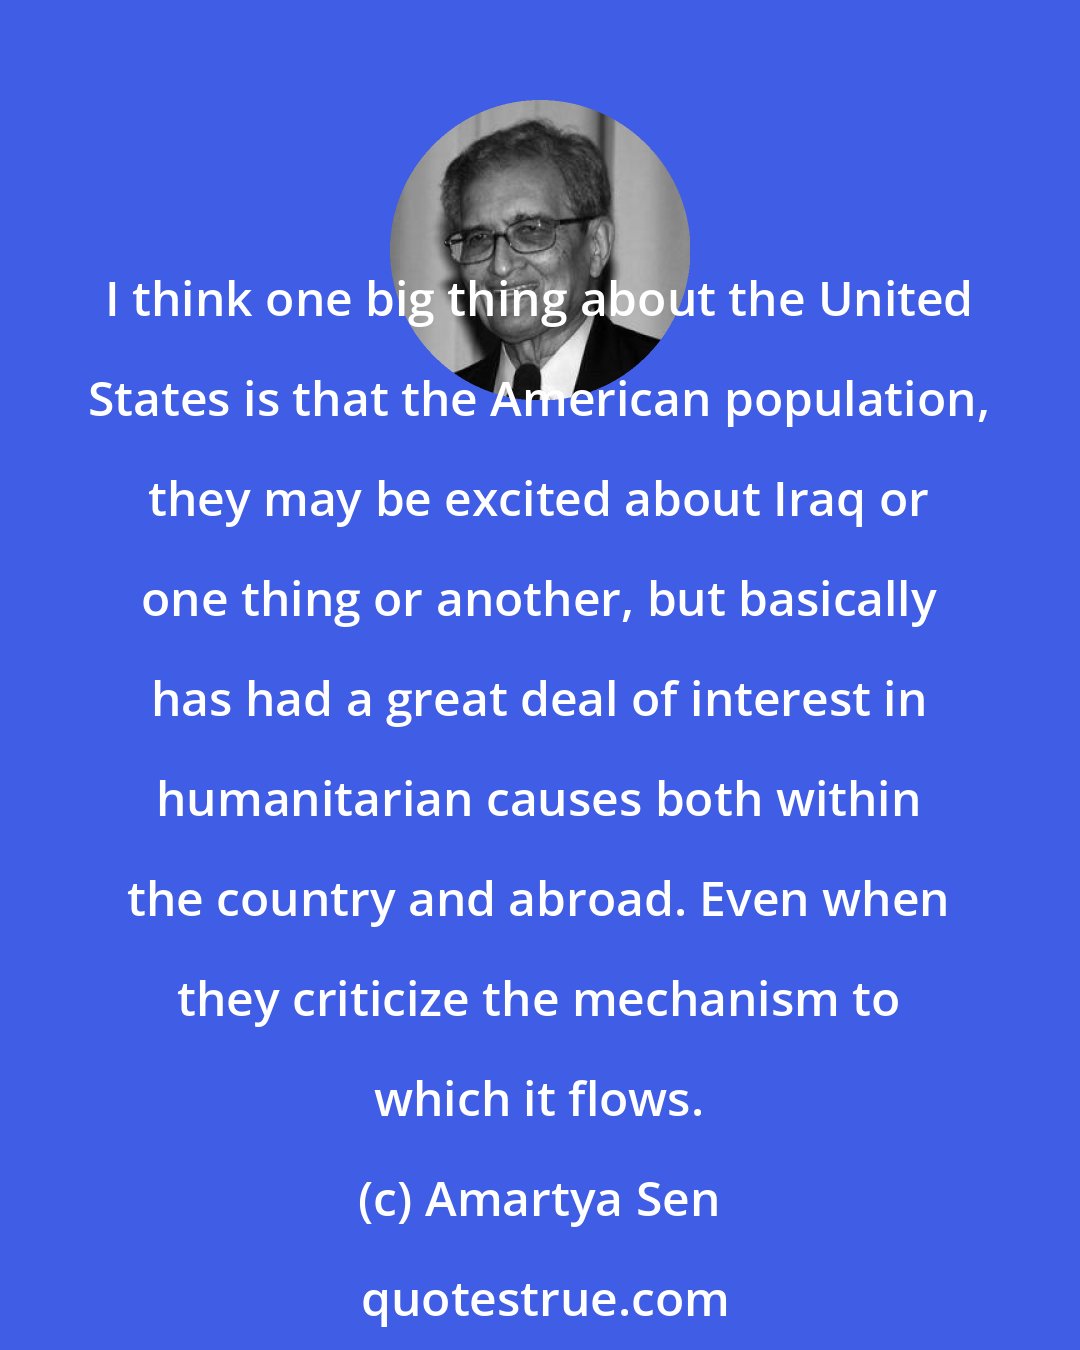 Amartya Sen: I think one big thing about the United States is that the American population, they may be excited about Iraq or one thing or another, but basically has had a great deal of interest in humanitarian causes both within the country and abroad. Even when they criticize the mechanism to which it flows.